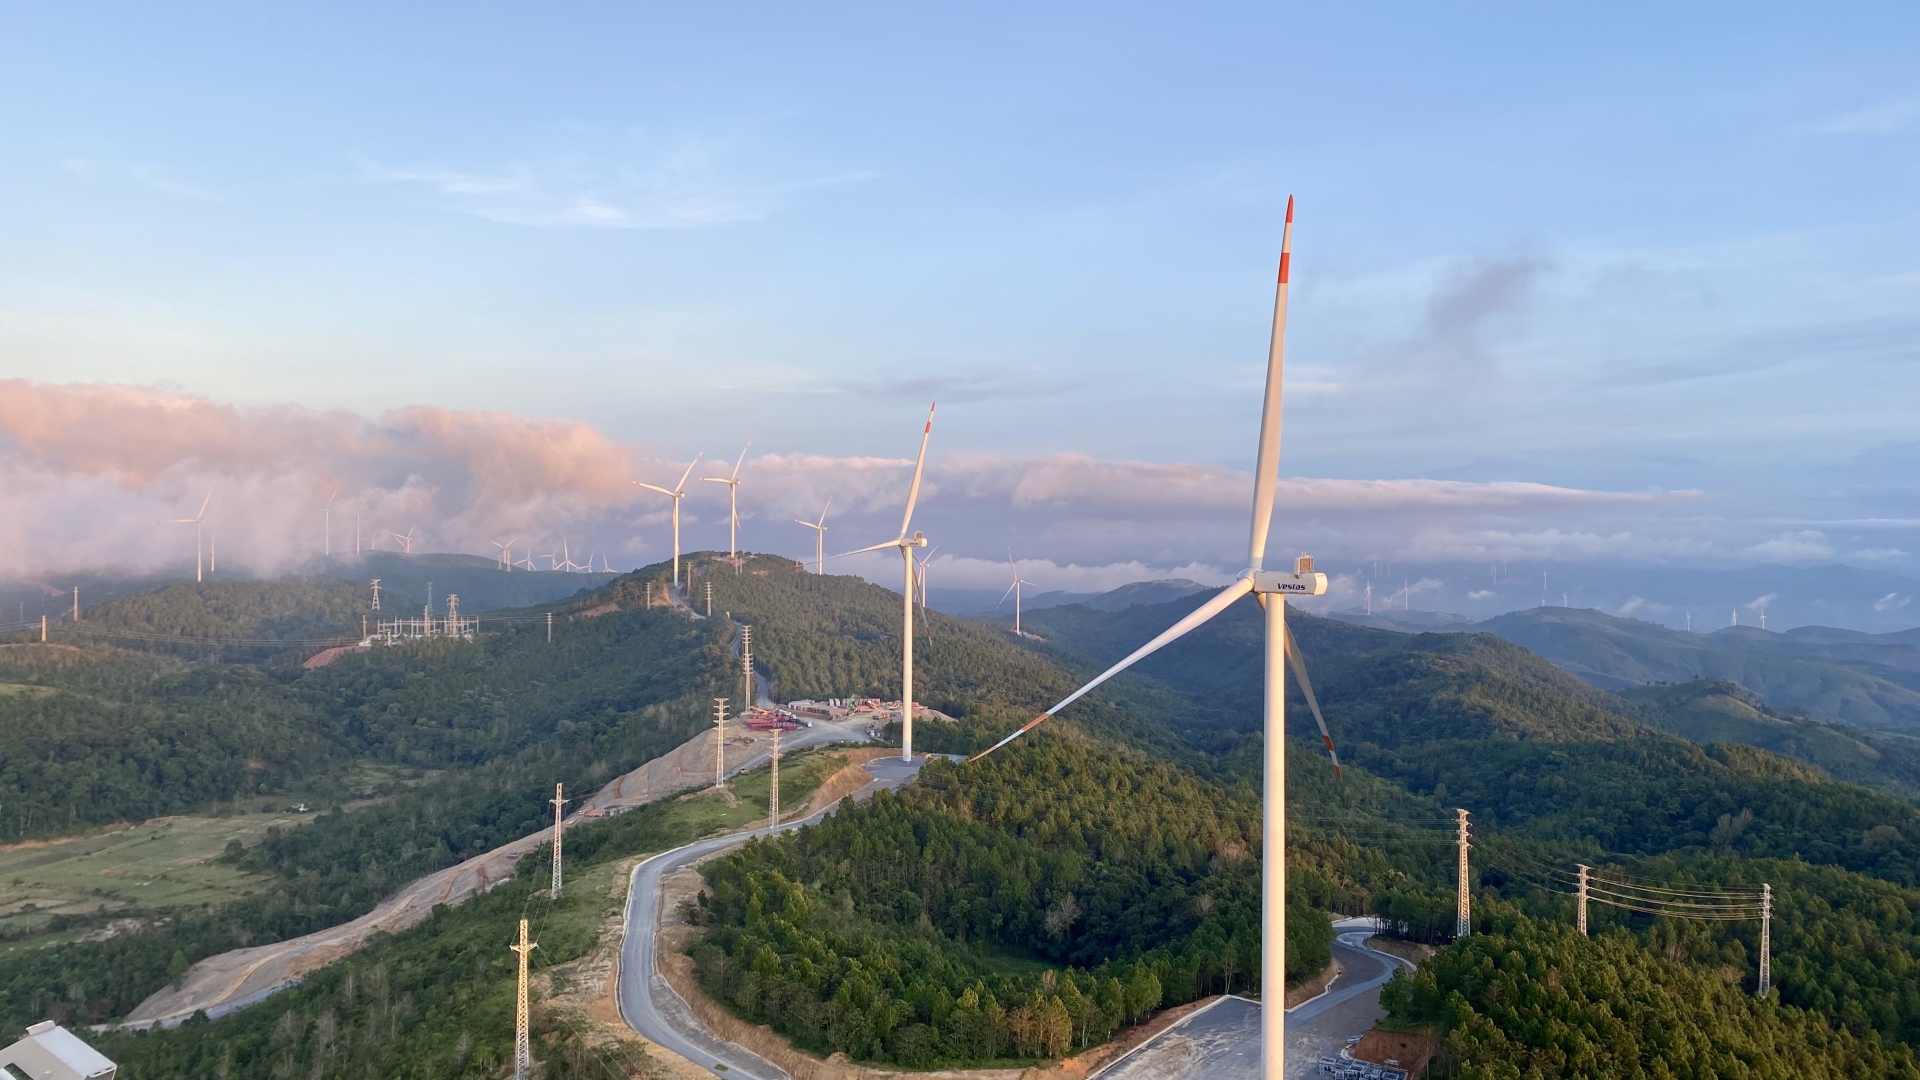 Export Finance Australia helped enable the development, construction and operation of the Lotus Wind Farm Project in Vietnam by providing finance.